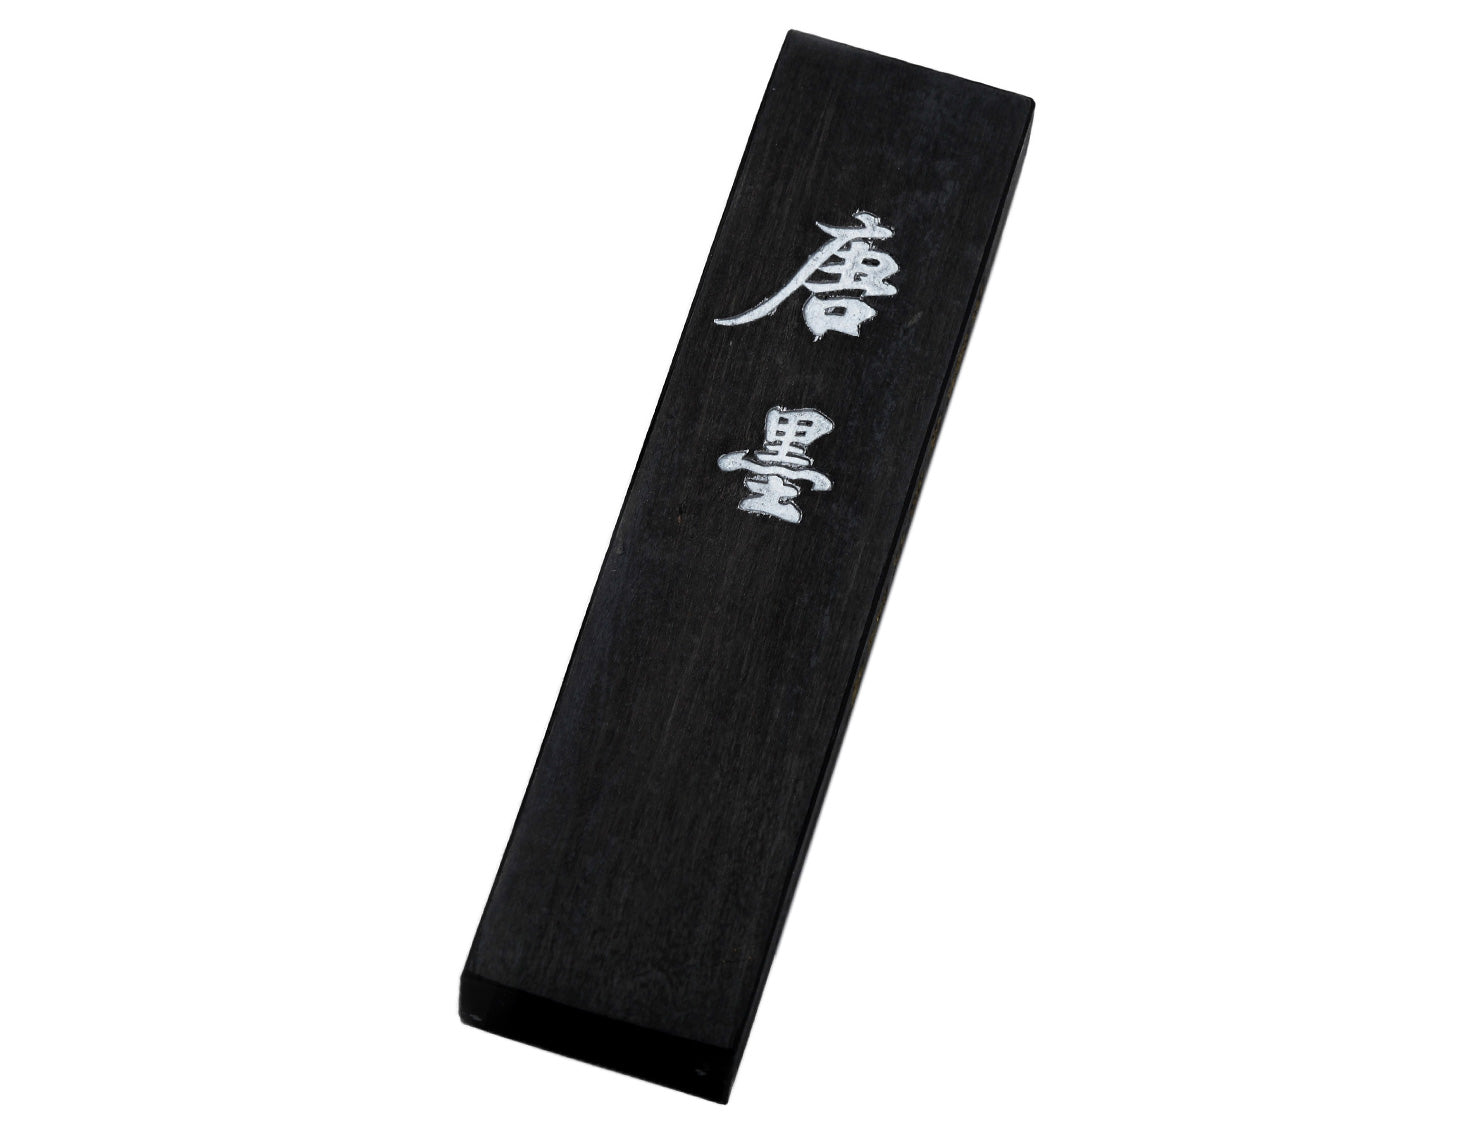 TANG MO - Oriental Chinese Brush Painting Ink Stick - Warm Glossy Black